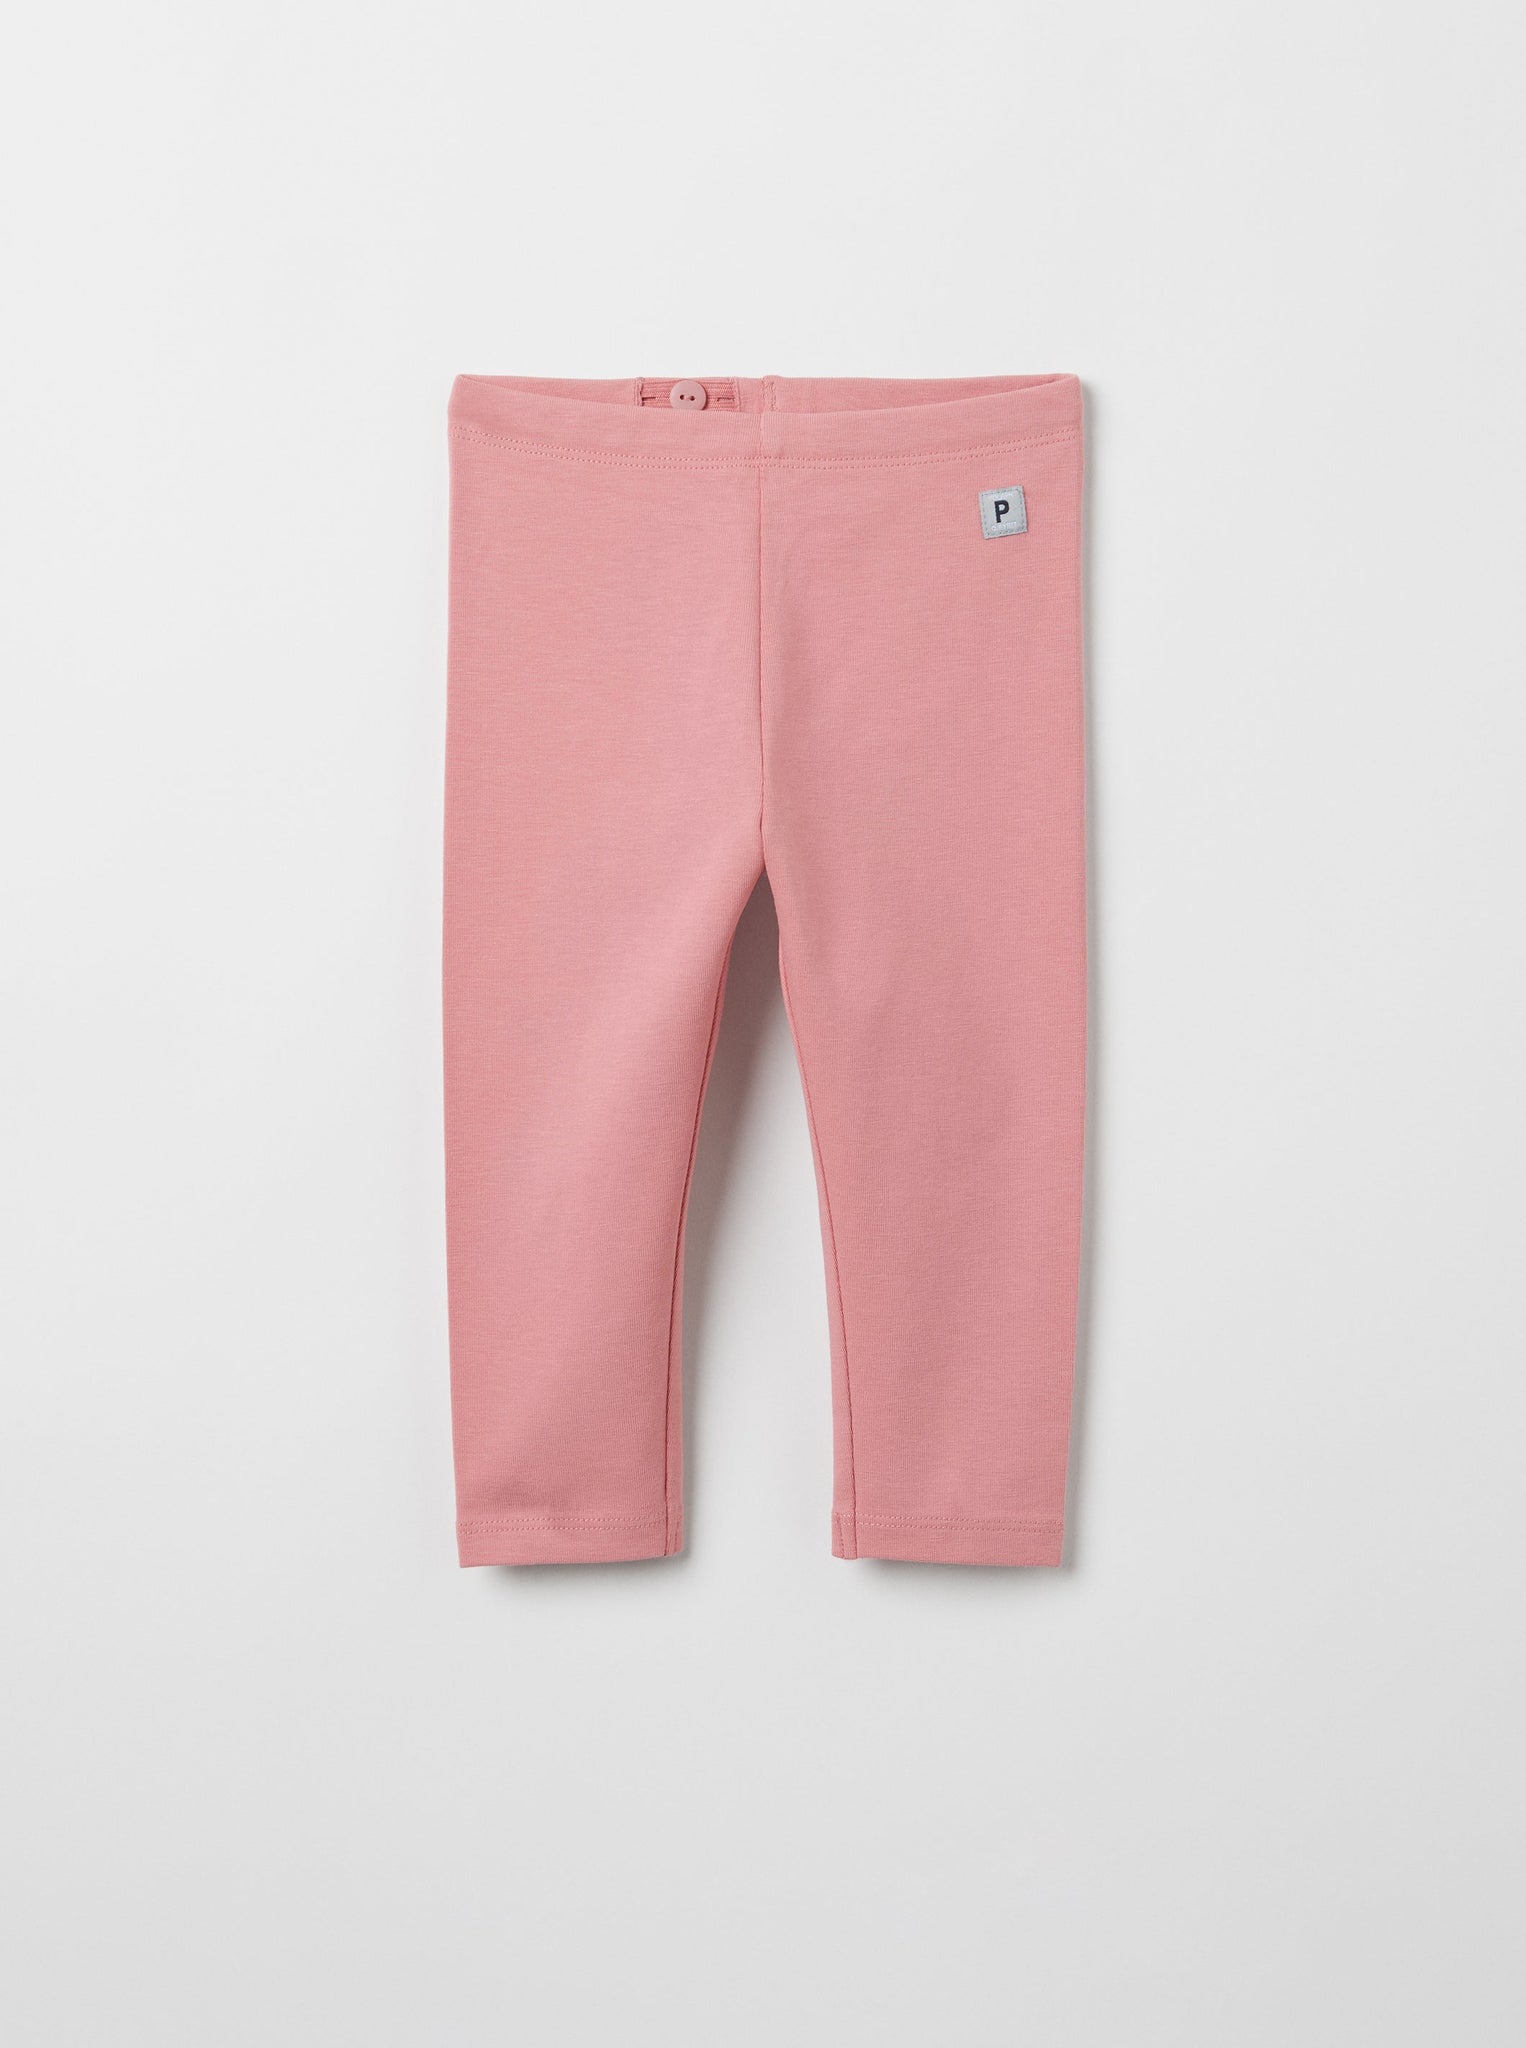 Organic Cotton Pink Baby Leggings from the Polarn O. Pyret babywear collection. Clothes made using sustainably sourced materials.